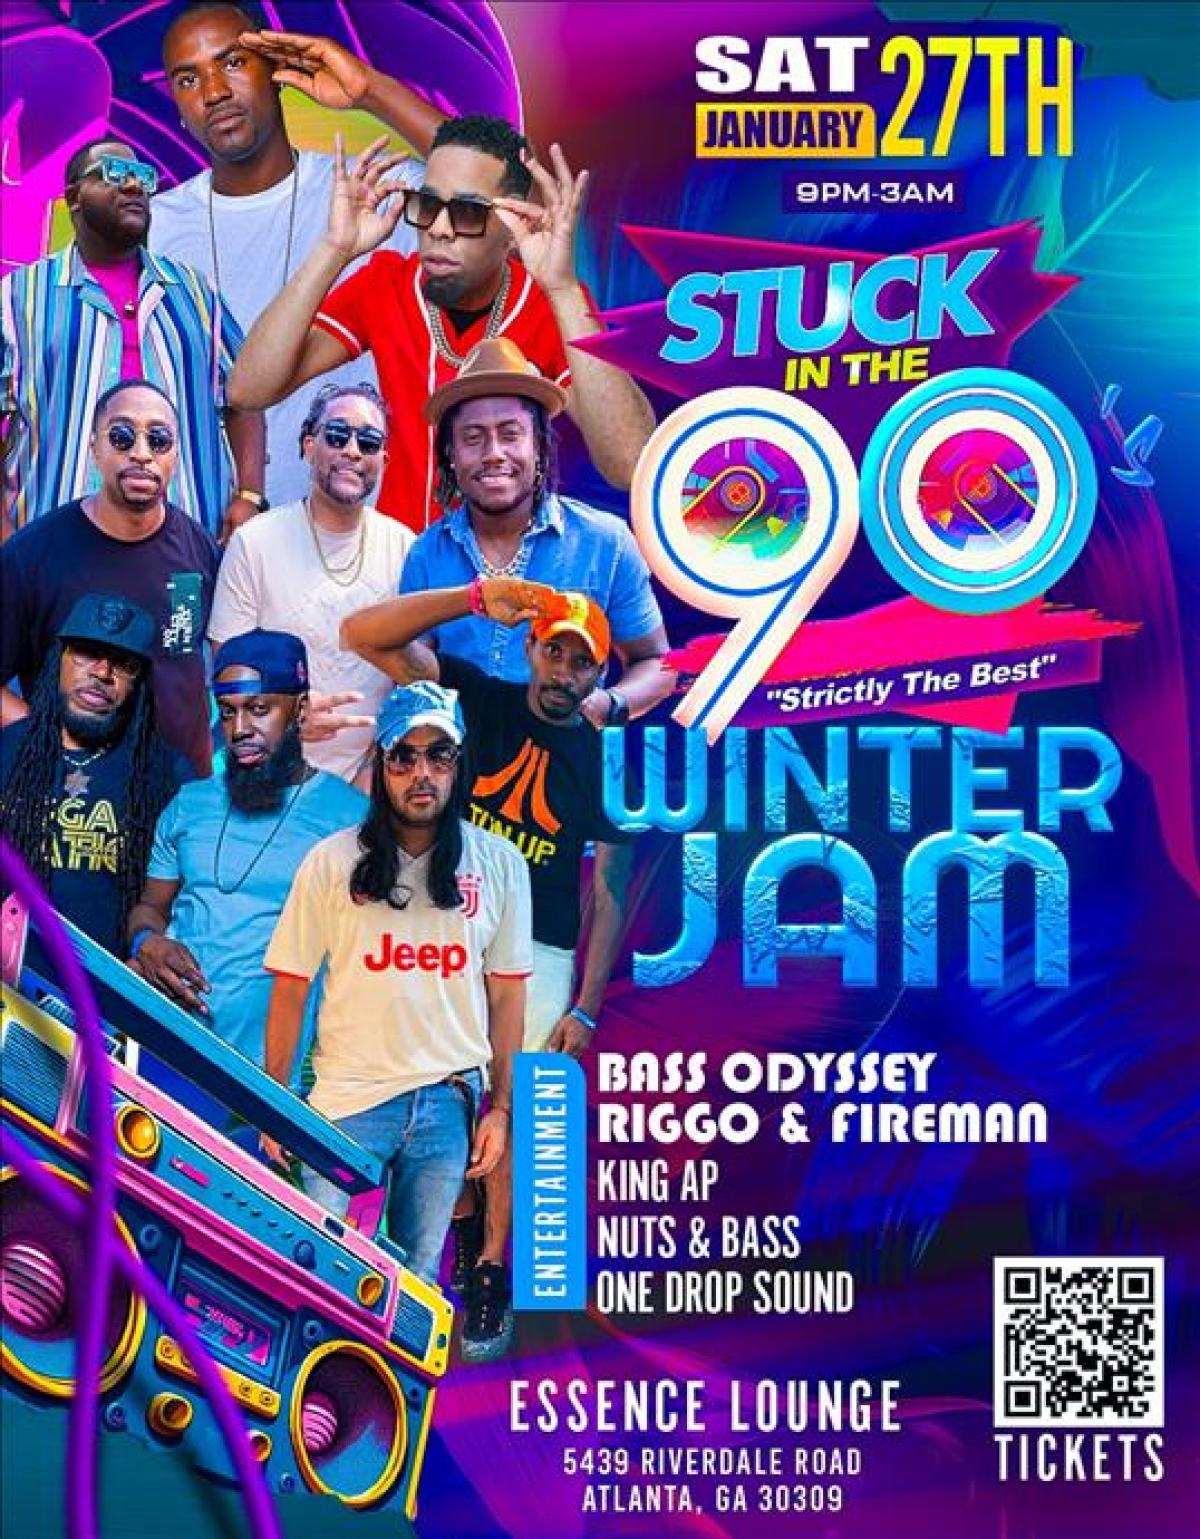  Stuck In The 90s Winter Jam flyer or graphic.